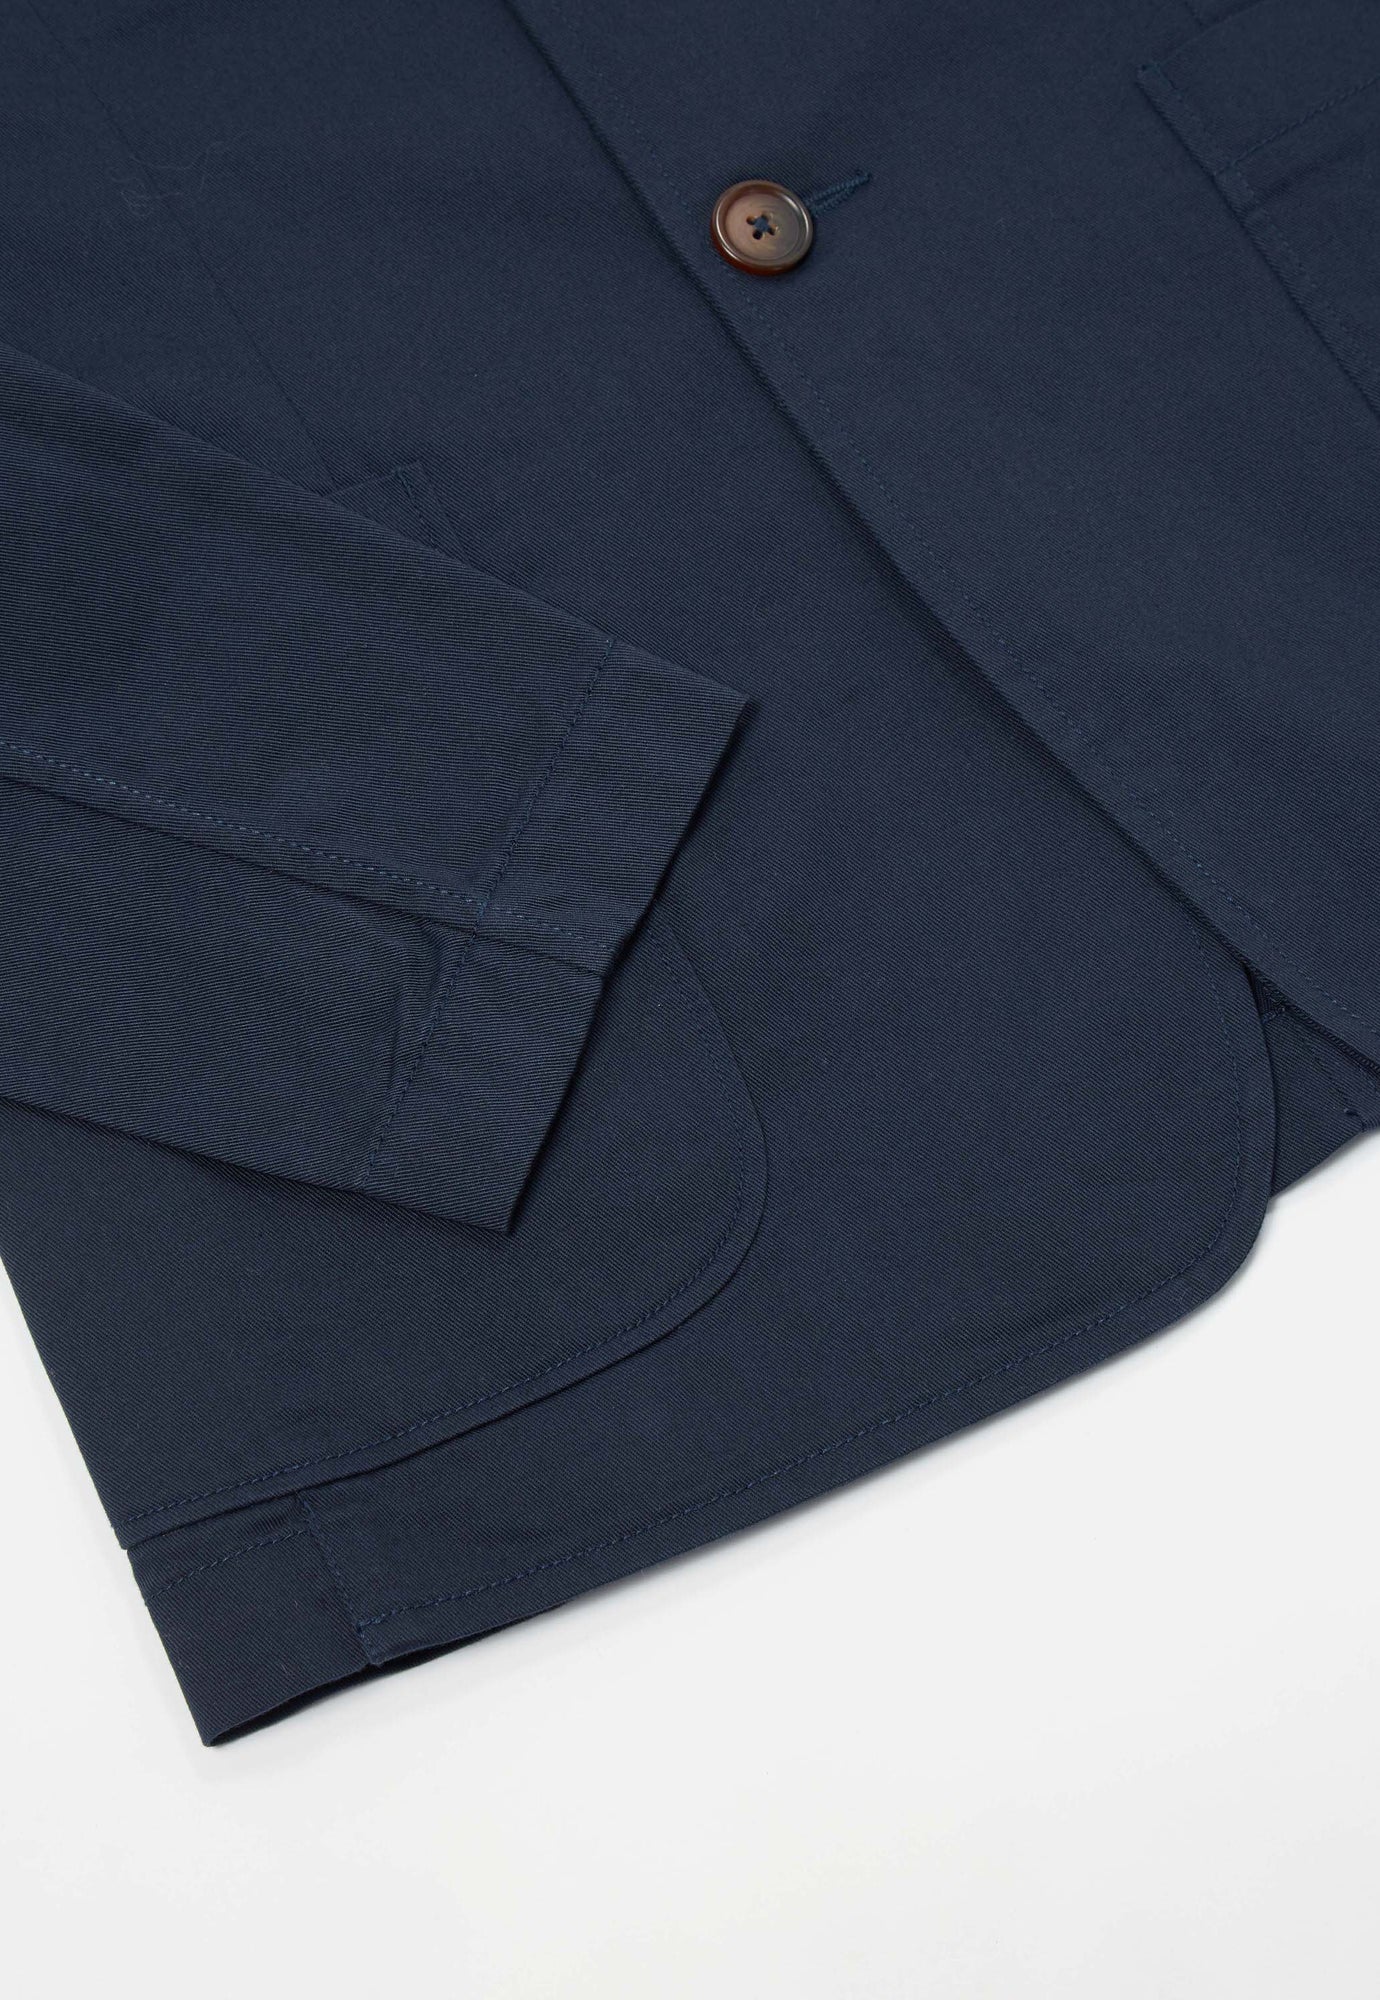 Universal Works | The London Jacket | Navy Twill.